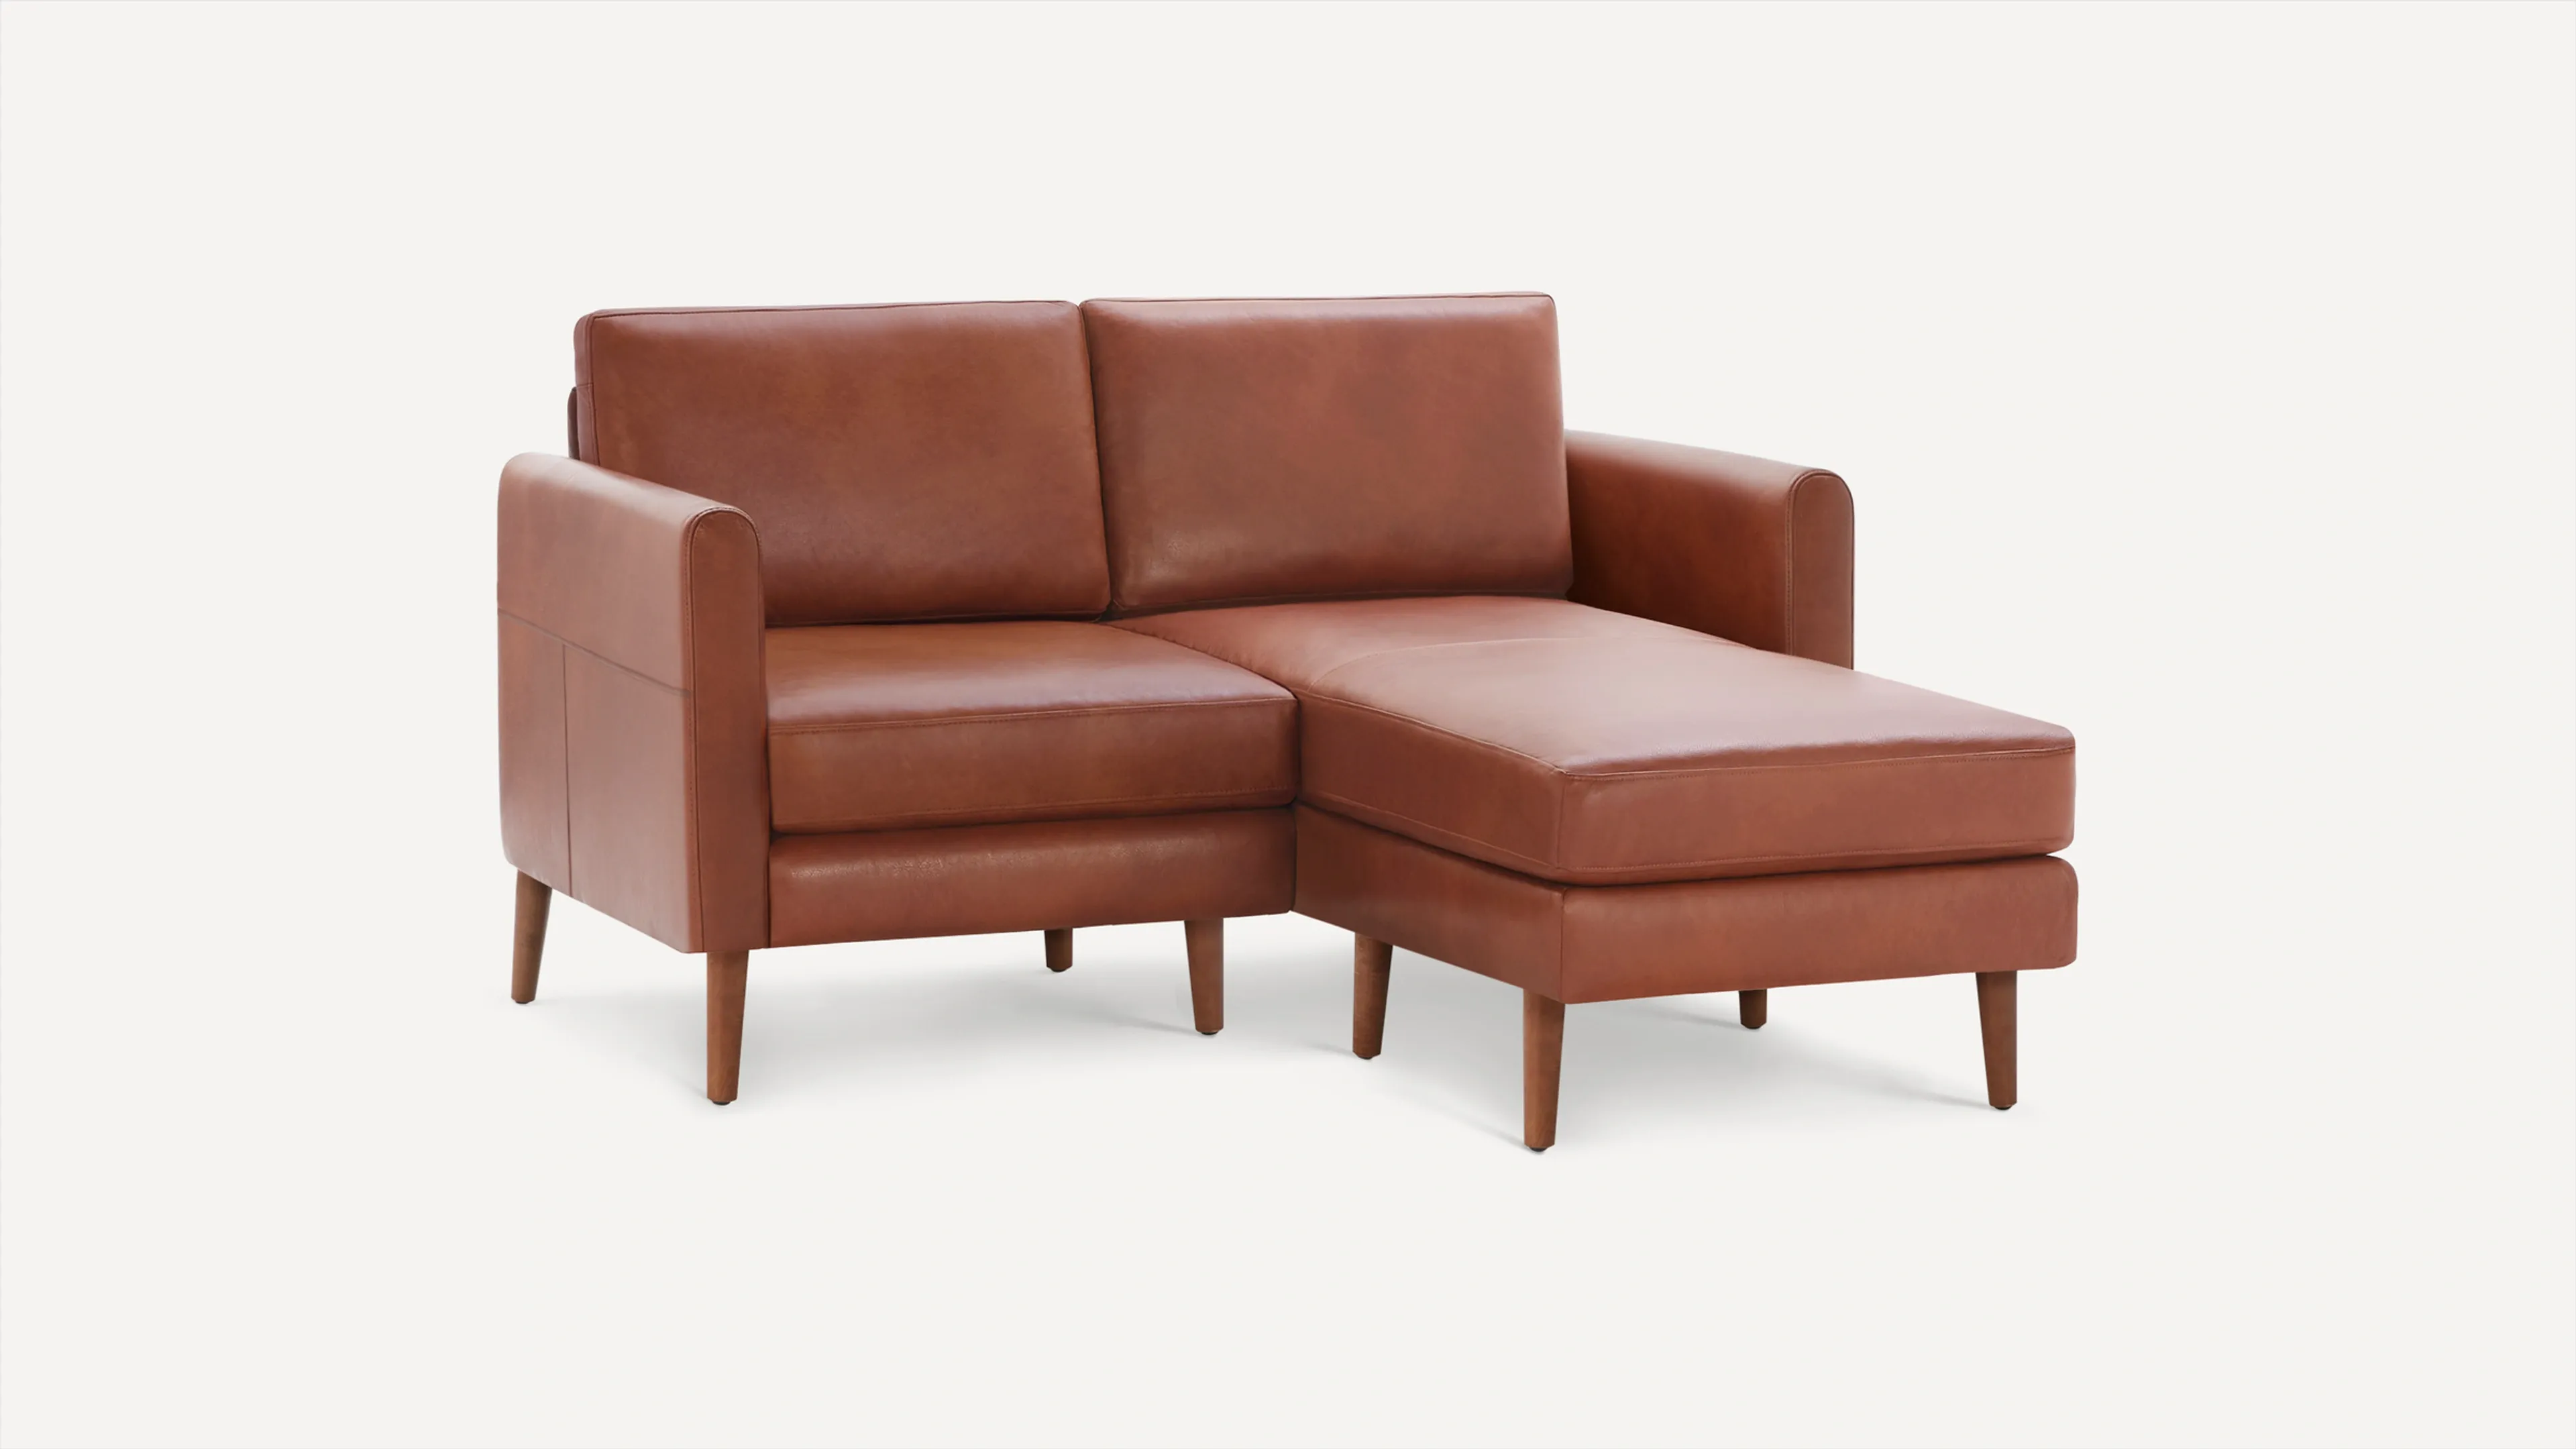 Original Chaise Loveseat in Chestnut Leather